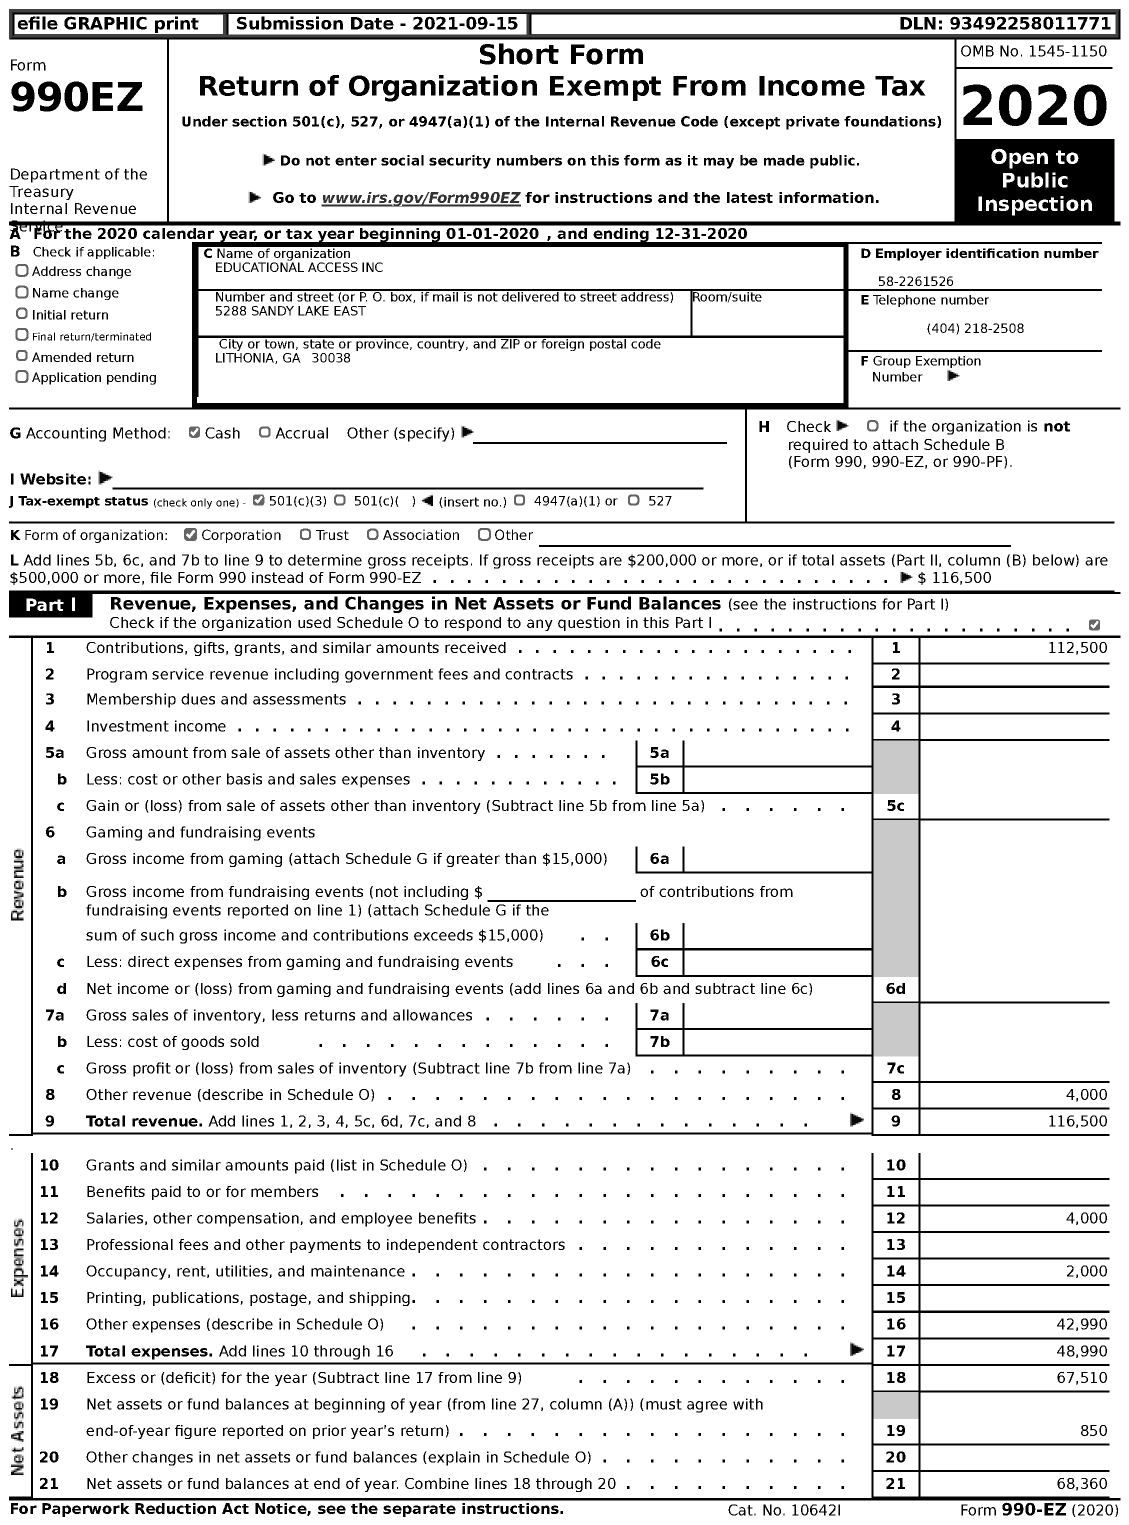 Image of first page of 2020 Form 990EZ for Educational Access